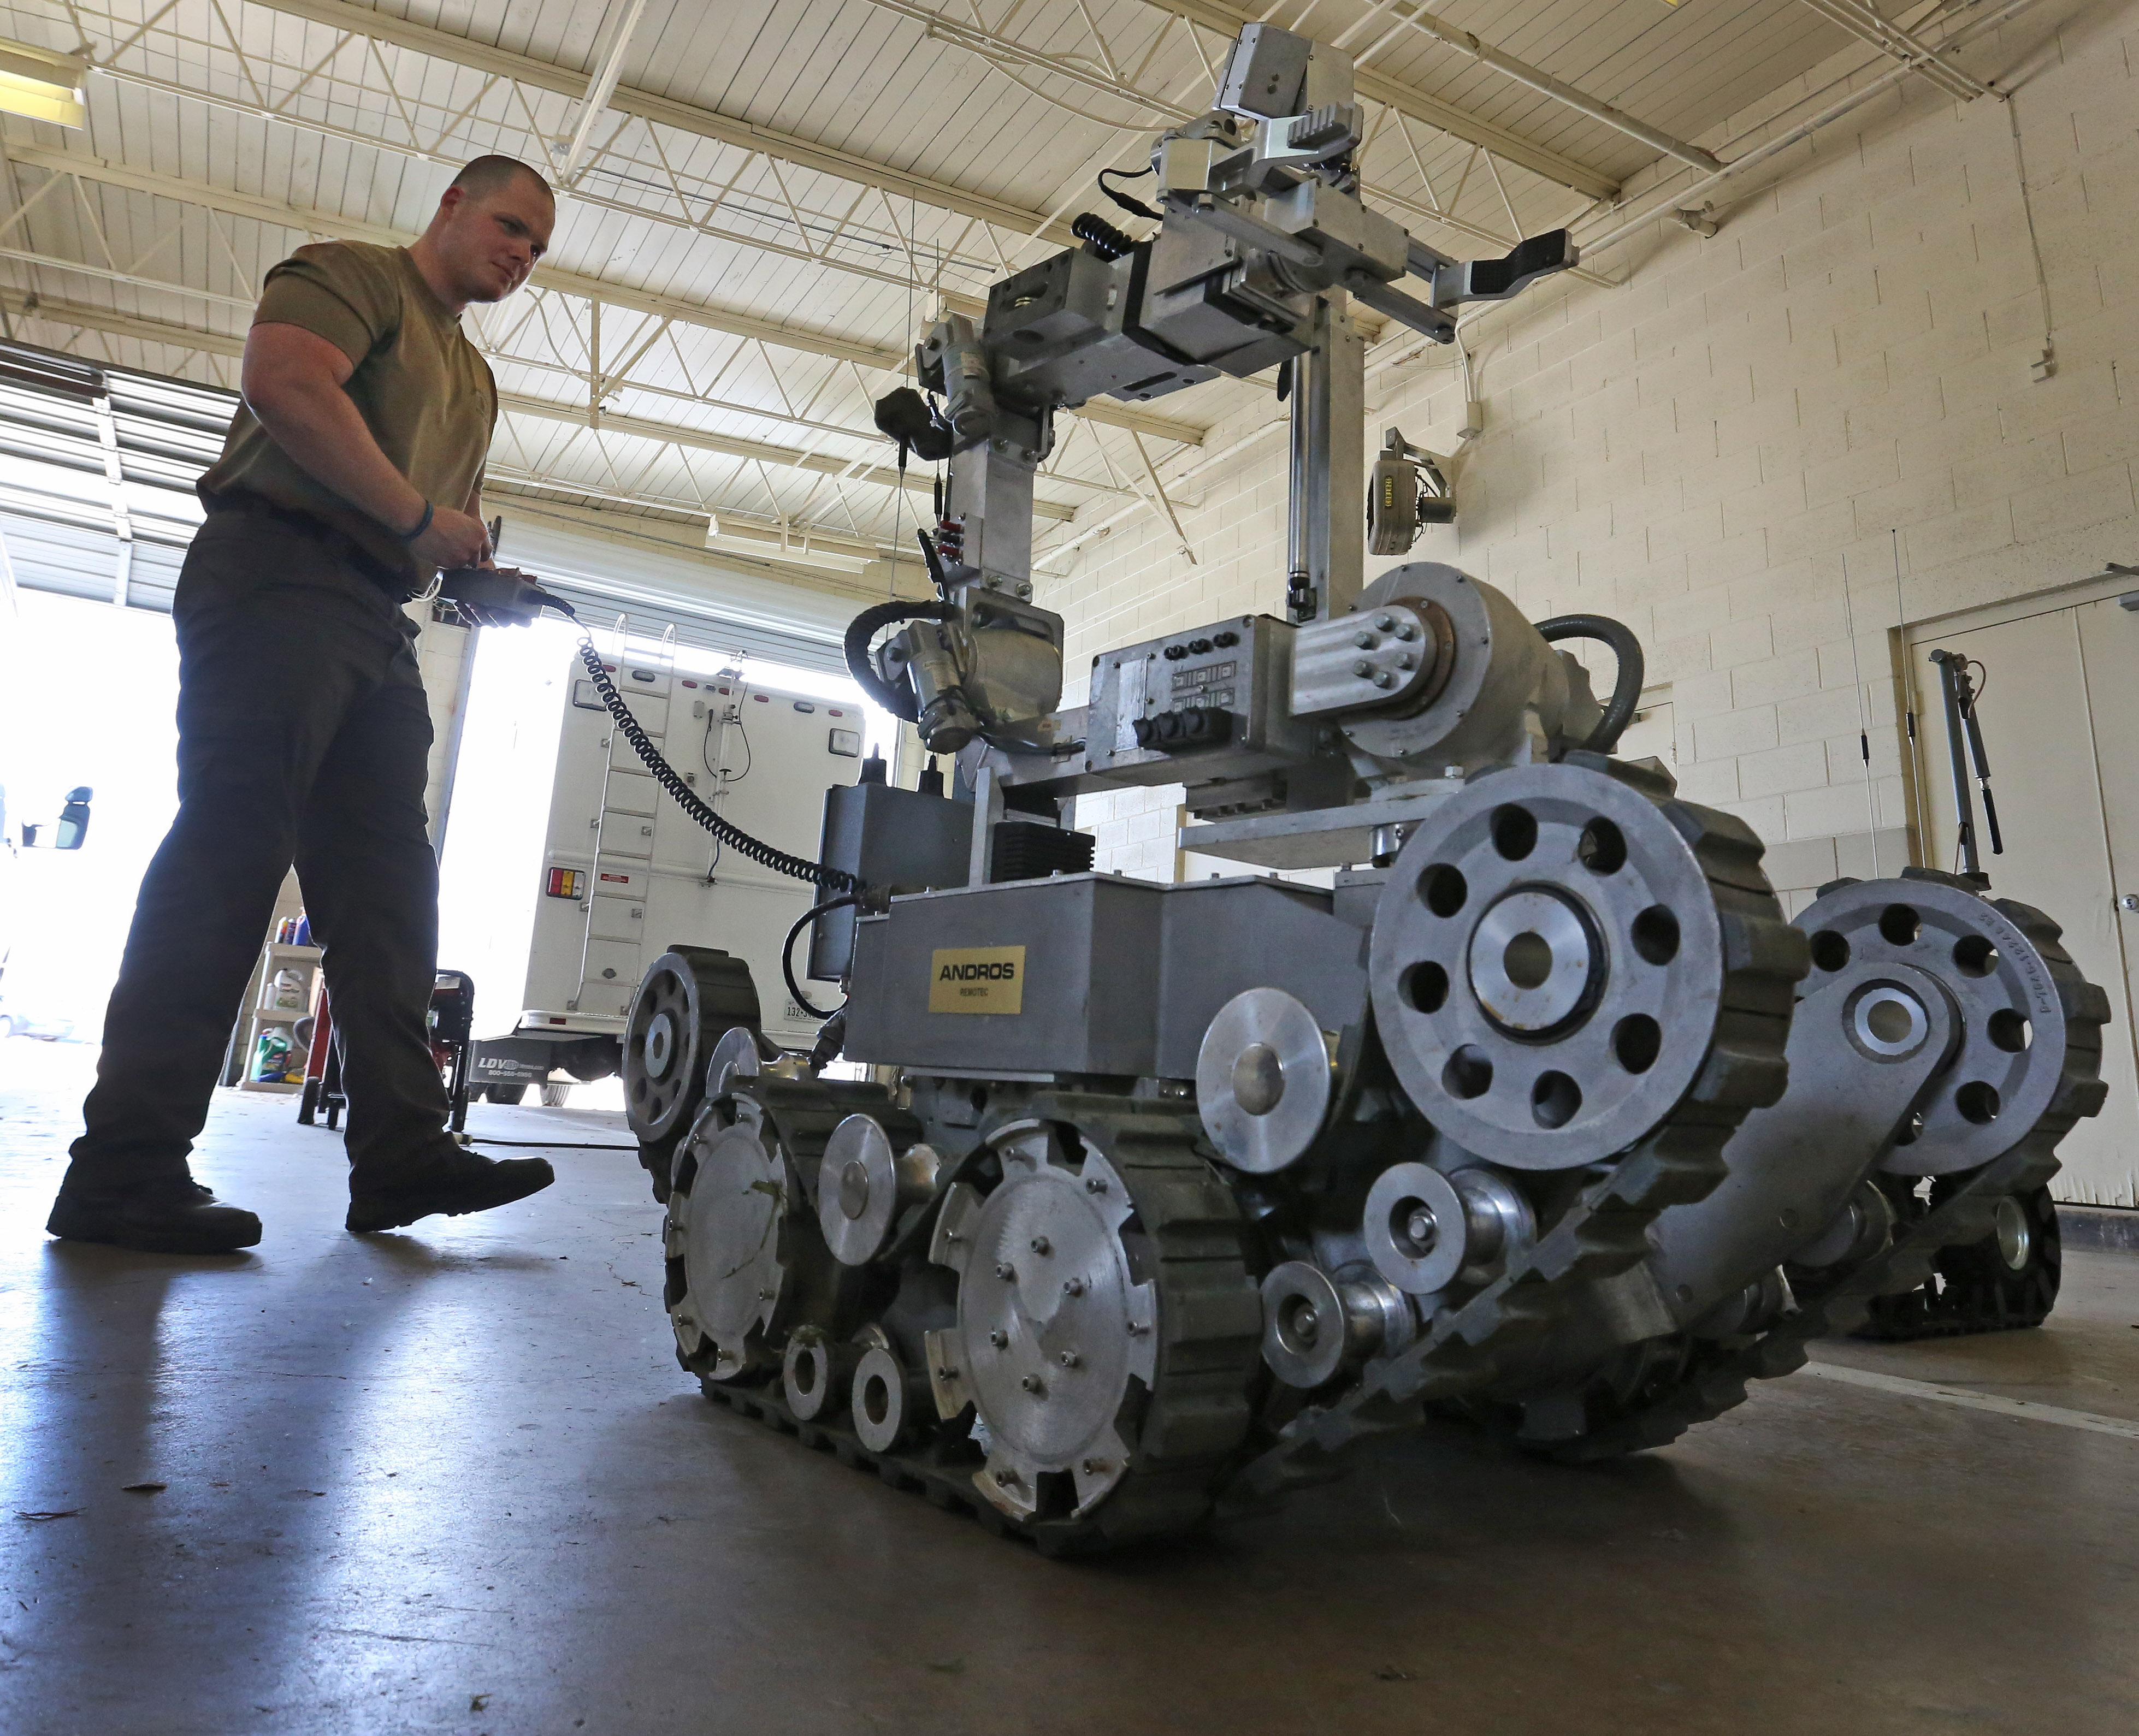 Meet the robots helping North Texas and bomb squads who operate